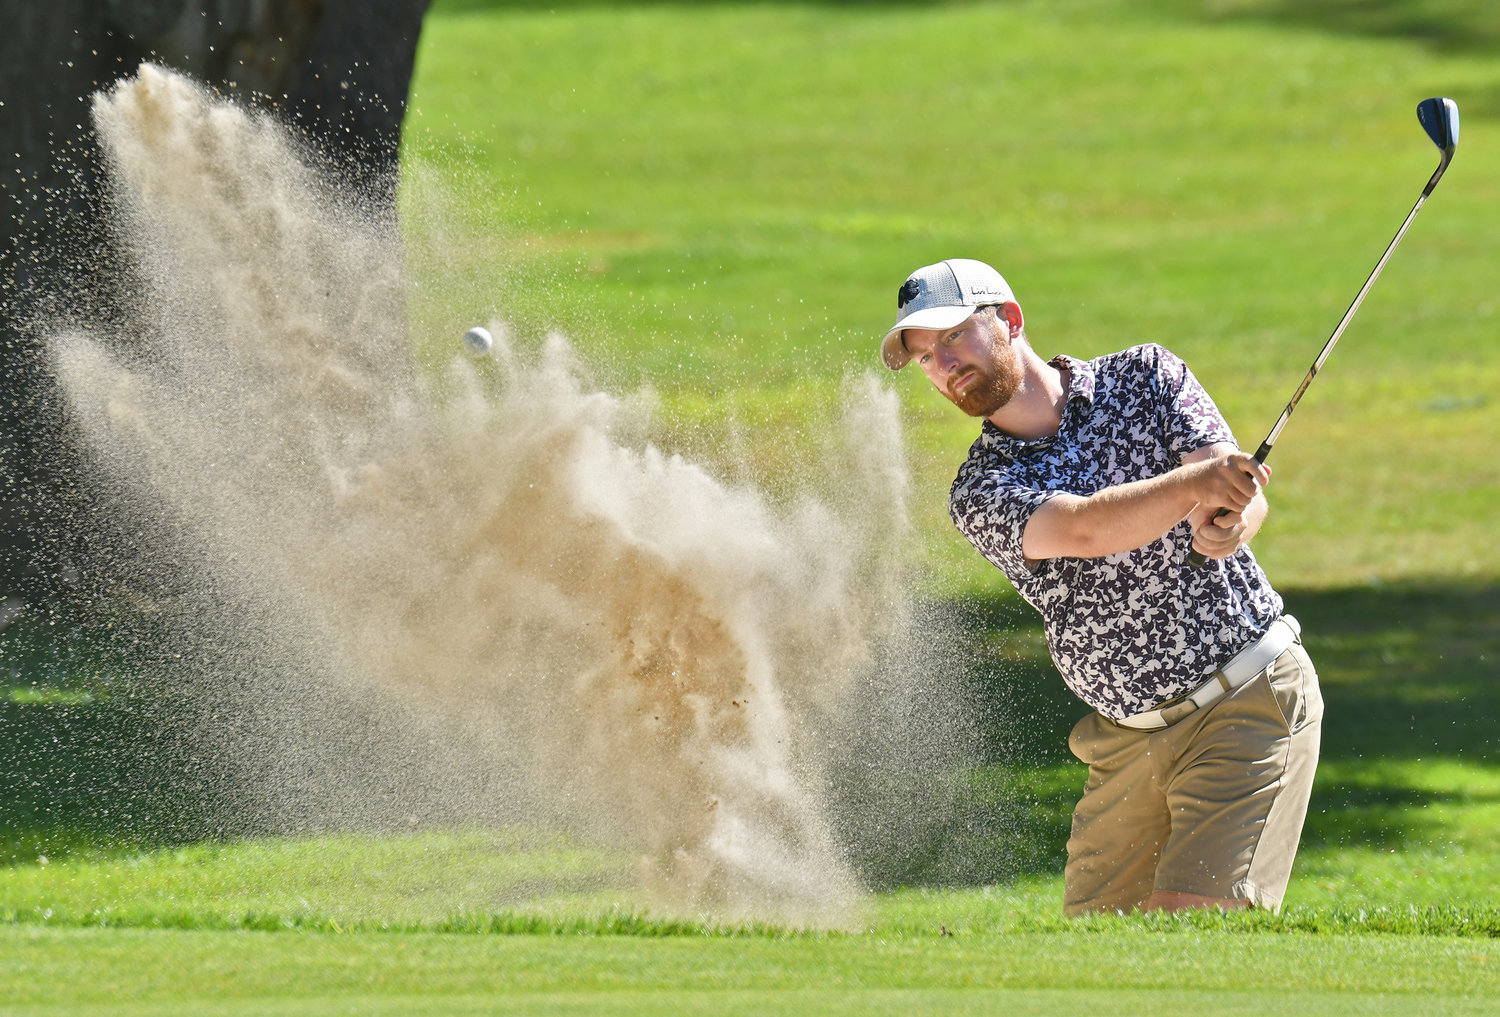 Dan O'Connor blasts out of the 15th greenside sand trap on Sunday afternoon at McConnellsville Country Club during the final round of the Rome City Men's Amateur Golf Championship. O'Connor finished sixth with a two-day score of 161.